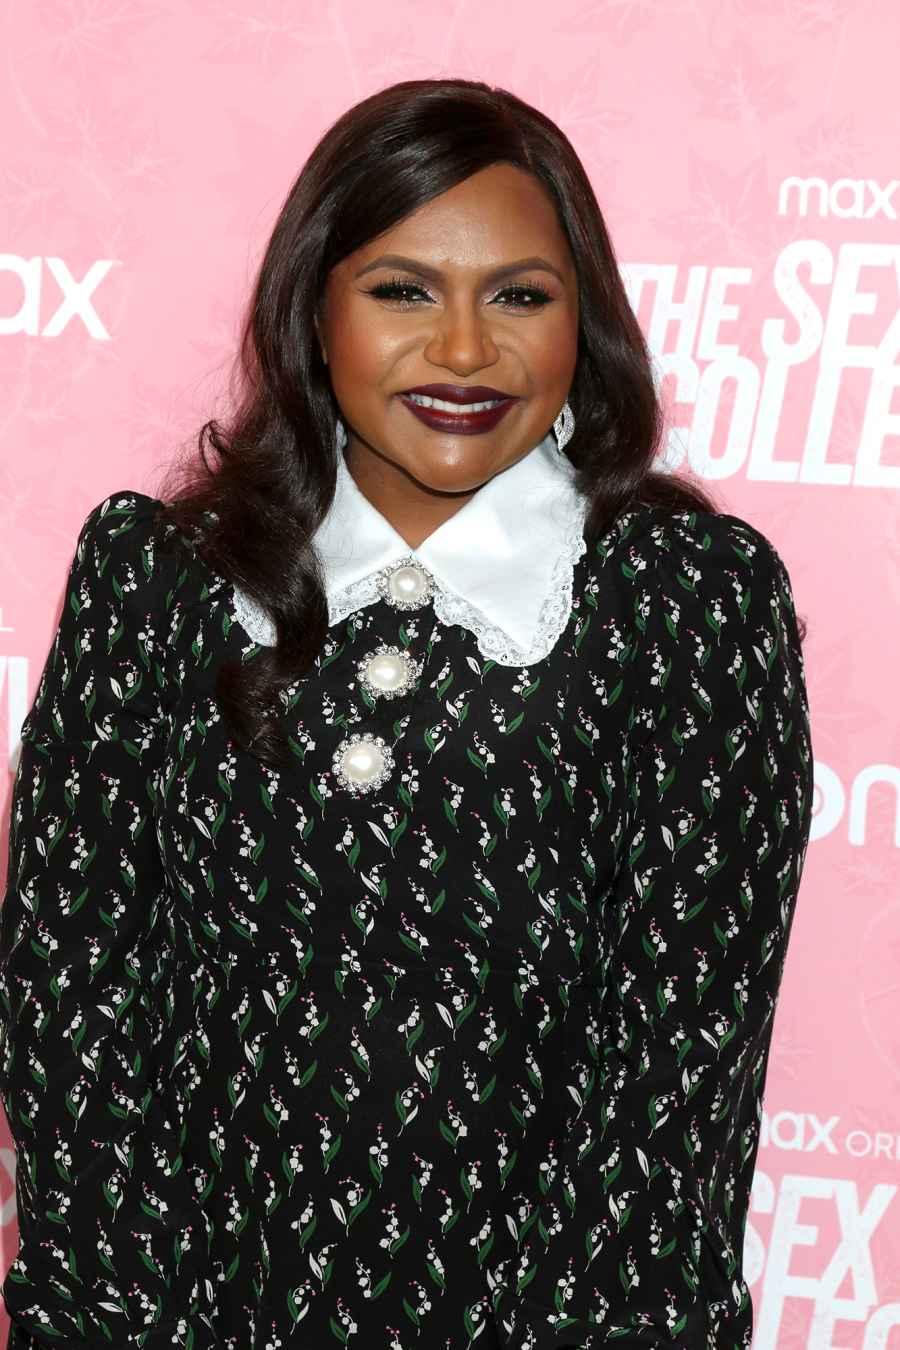 Mindy Kaling Teases ‘Legally Blonde 3’: ‘I Want to Deliver Something Awesome’